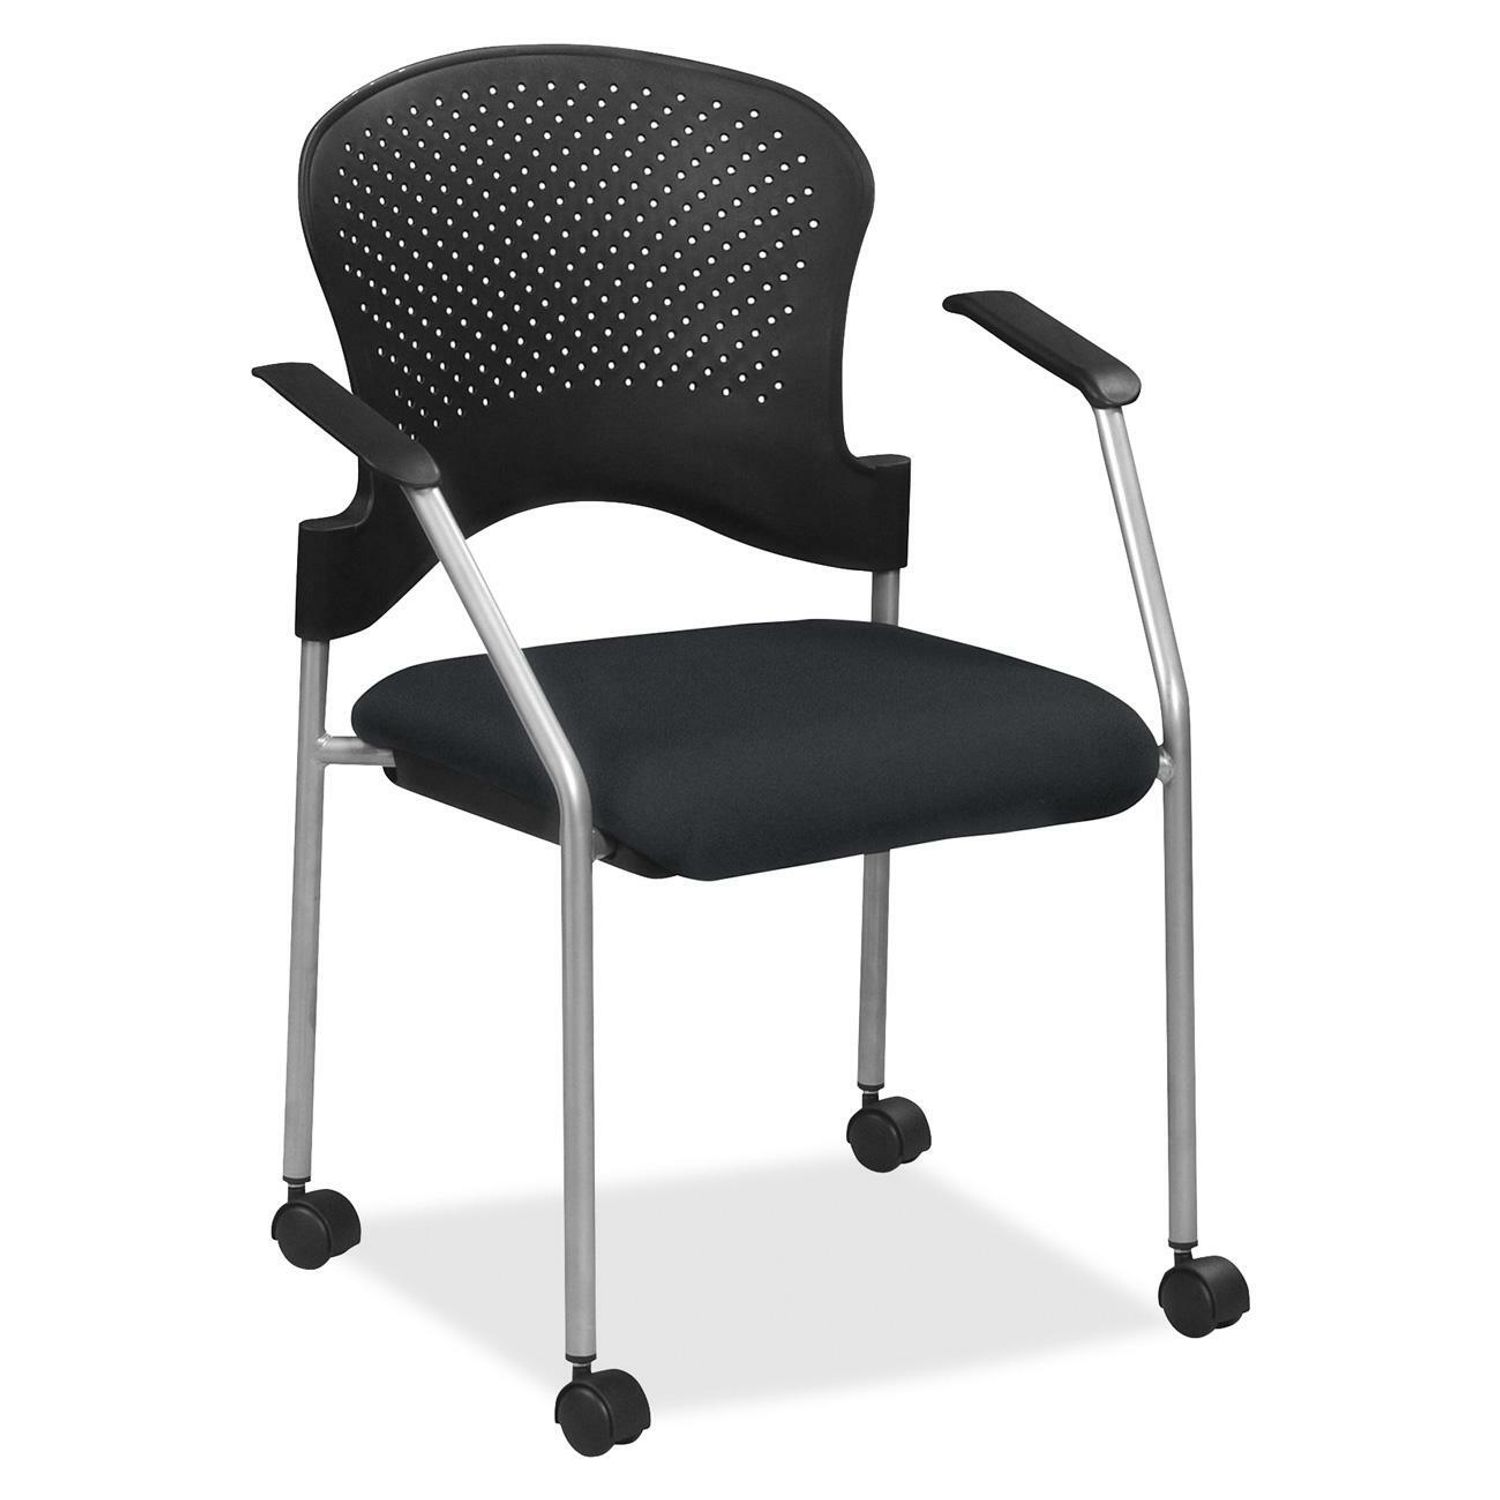 breeze FS8270 Stacking Chair Onyx Fabric Seat, Onyx Back, Gray Steel Frame, Four-legged Base, 1 Each